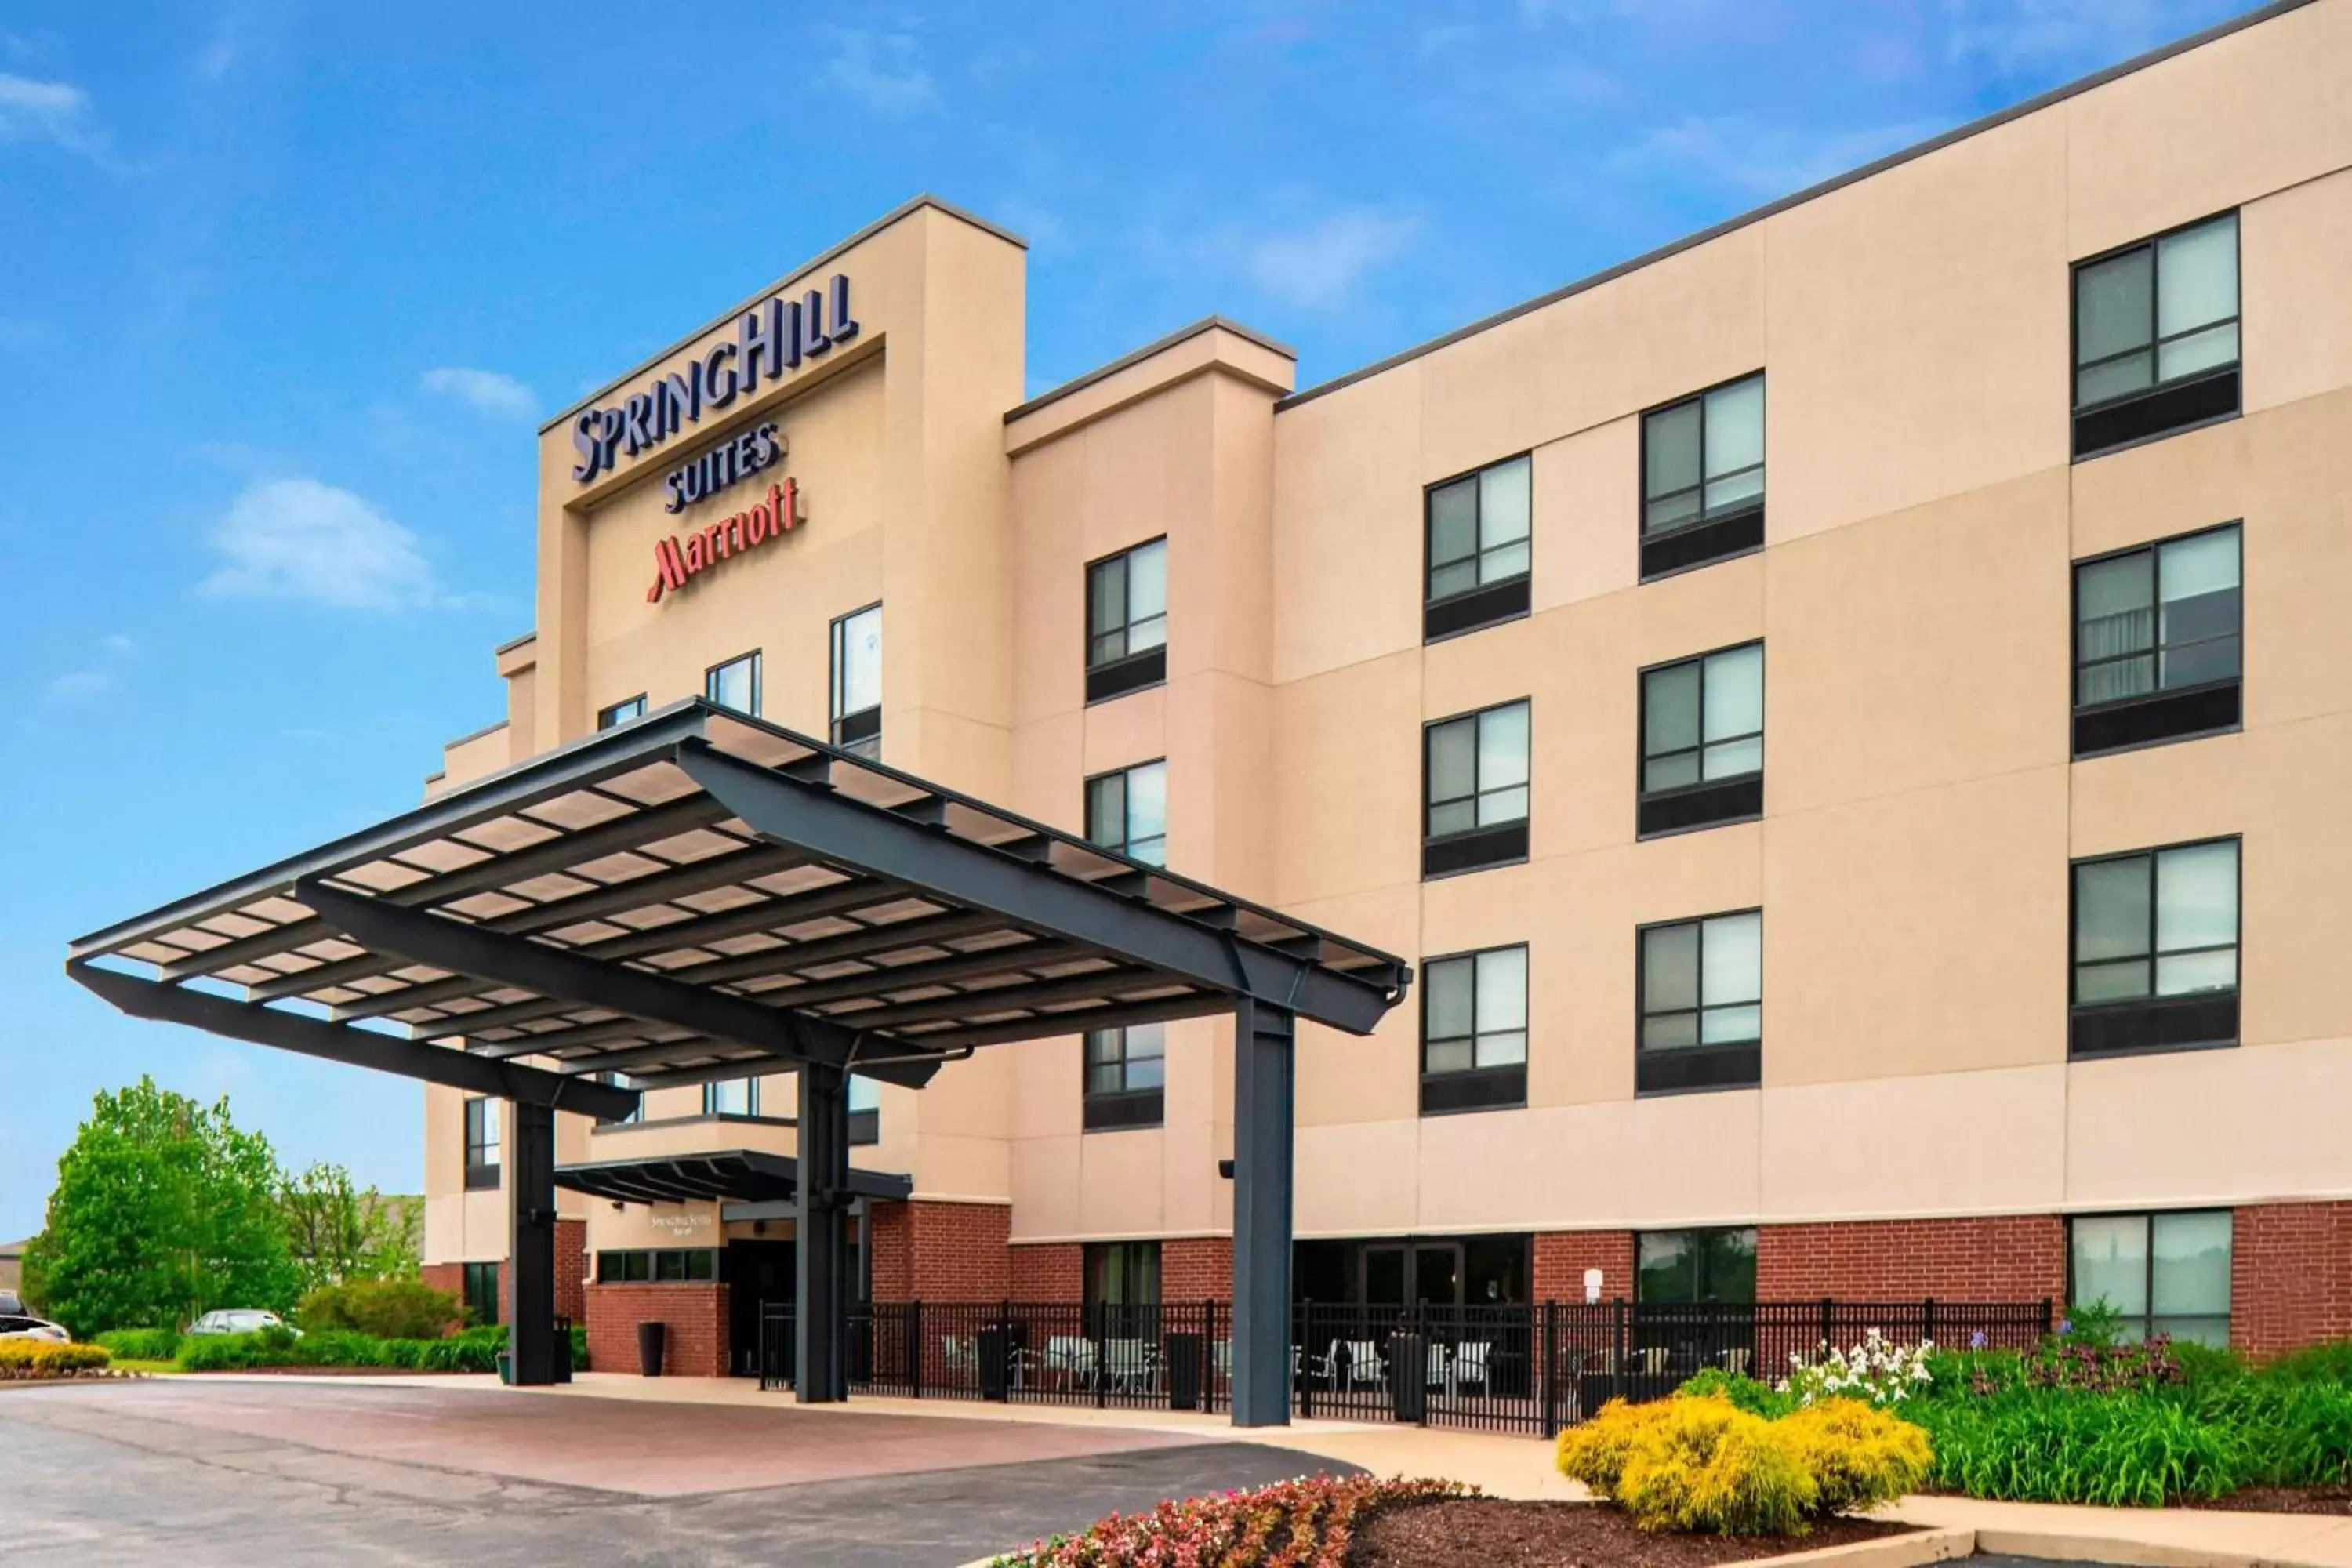 Property Building in SpringHill Suites St. Louis Airport/Earth City